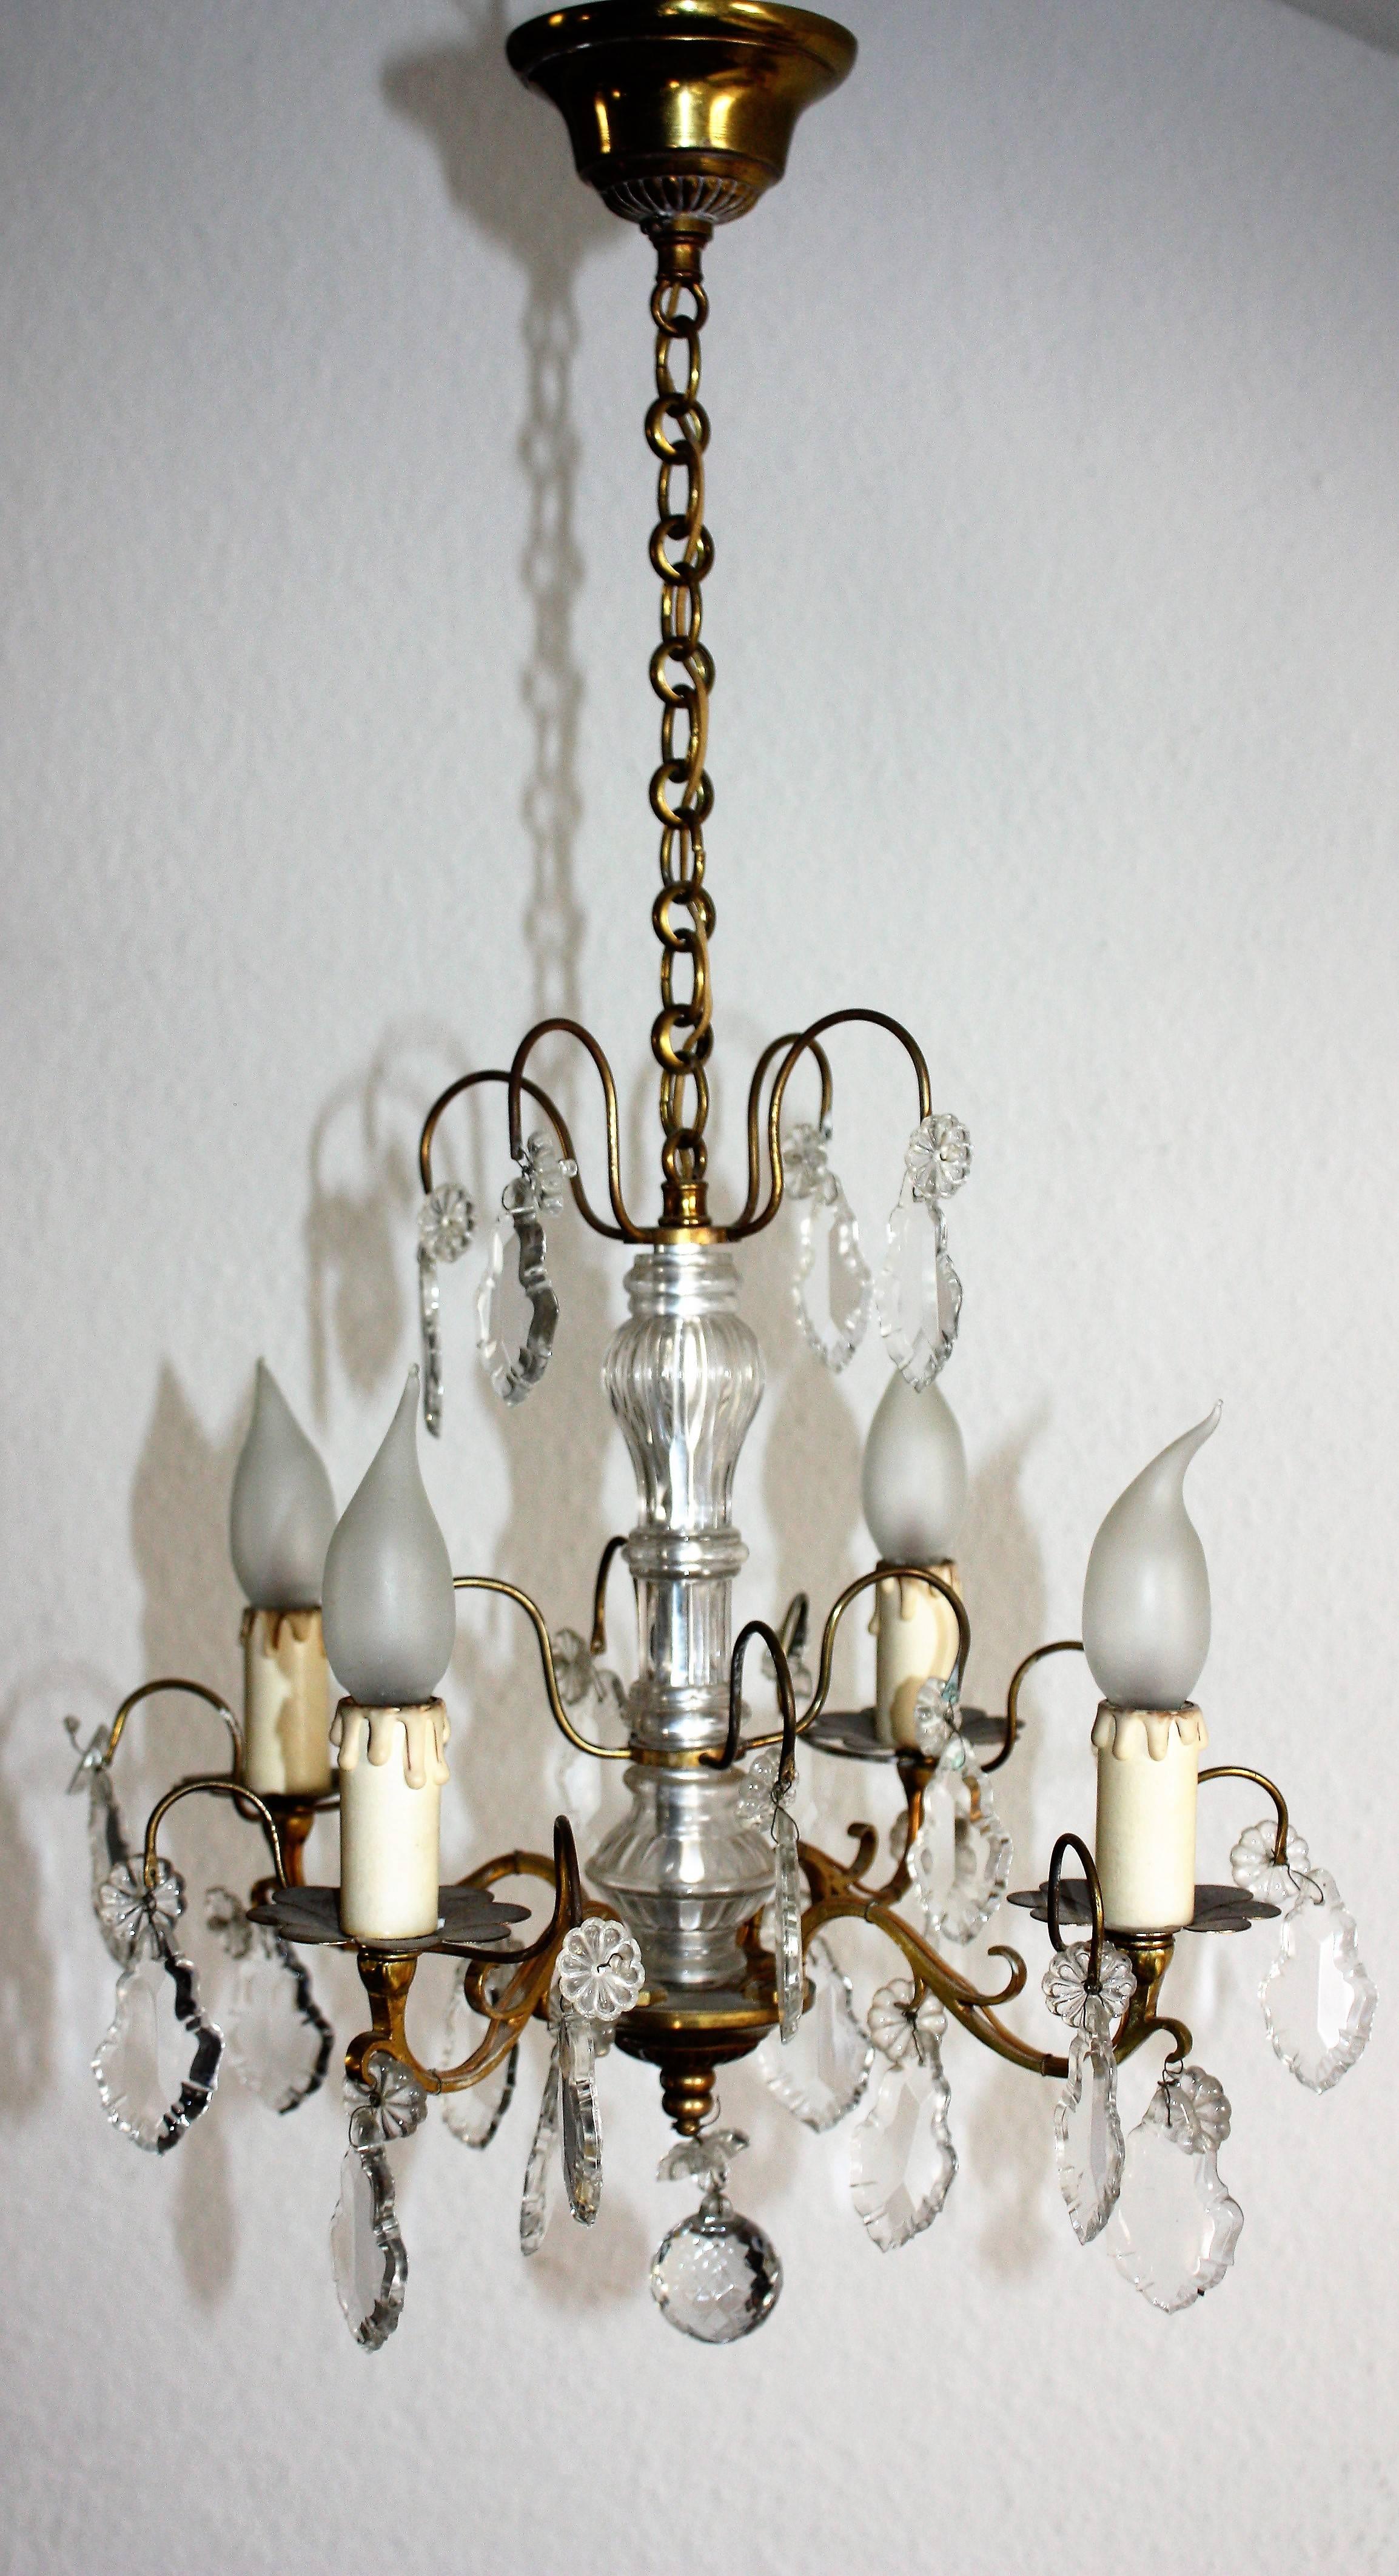 Small beautiful and elegant four-arm (light) chandelier with hand-cut crystal on the brass / bronze frame.
In my other auction you will find pair of matching wall sconces.